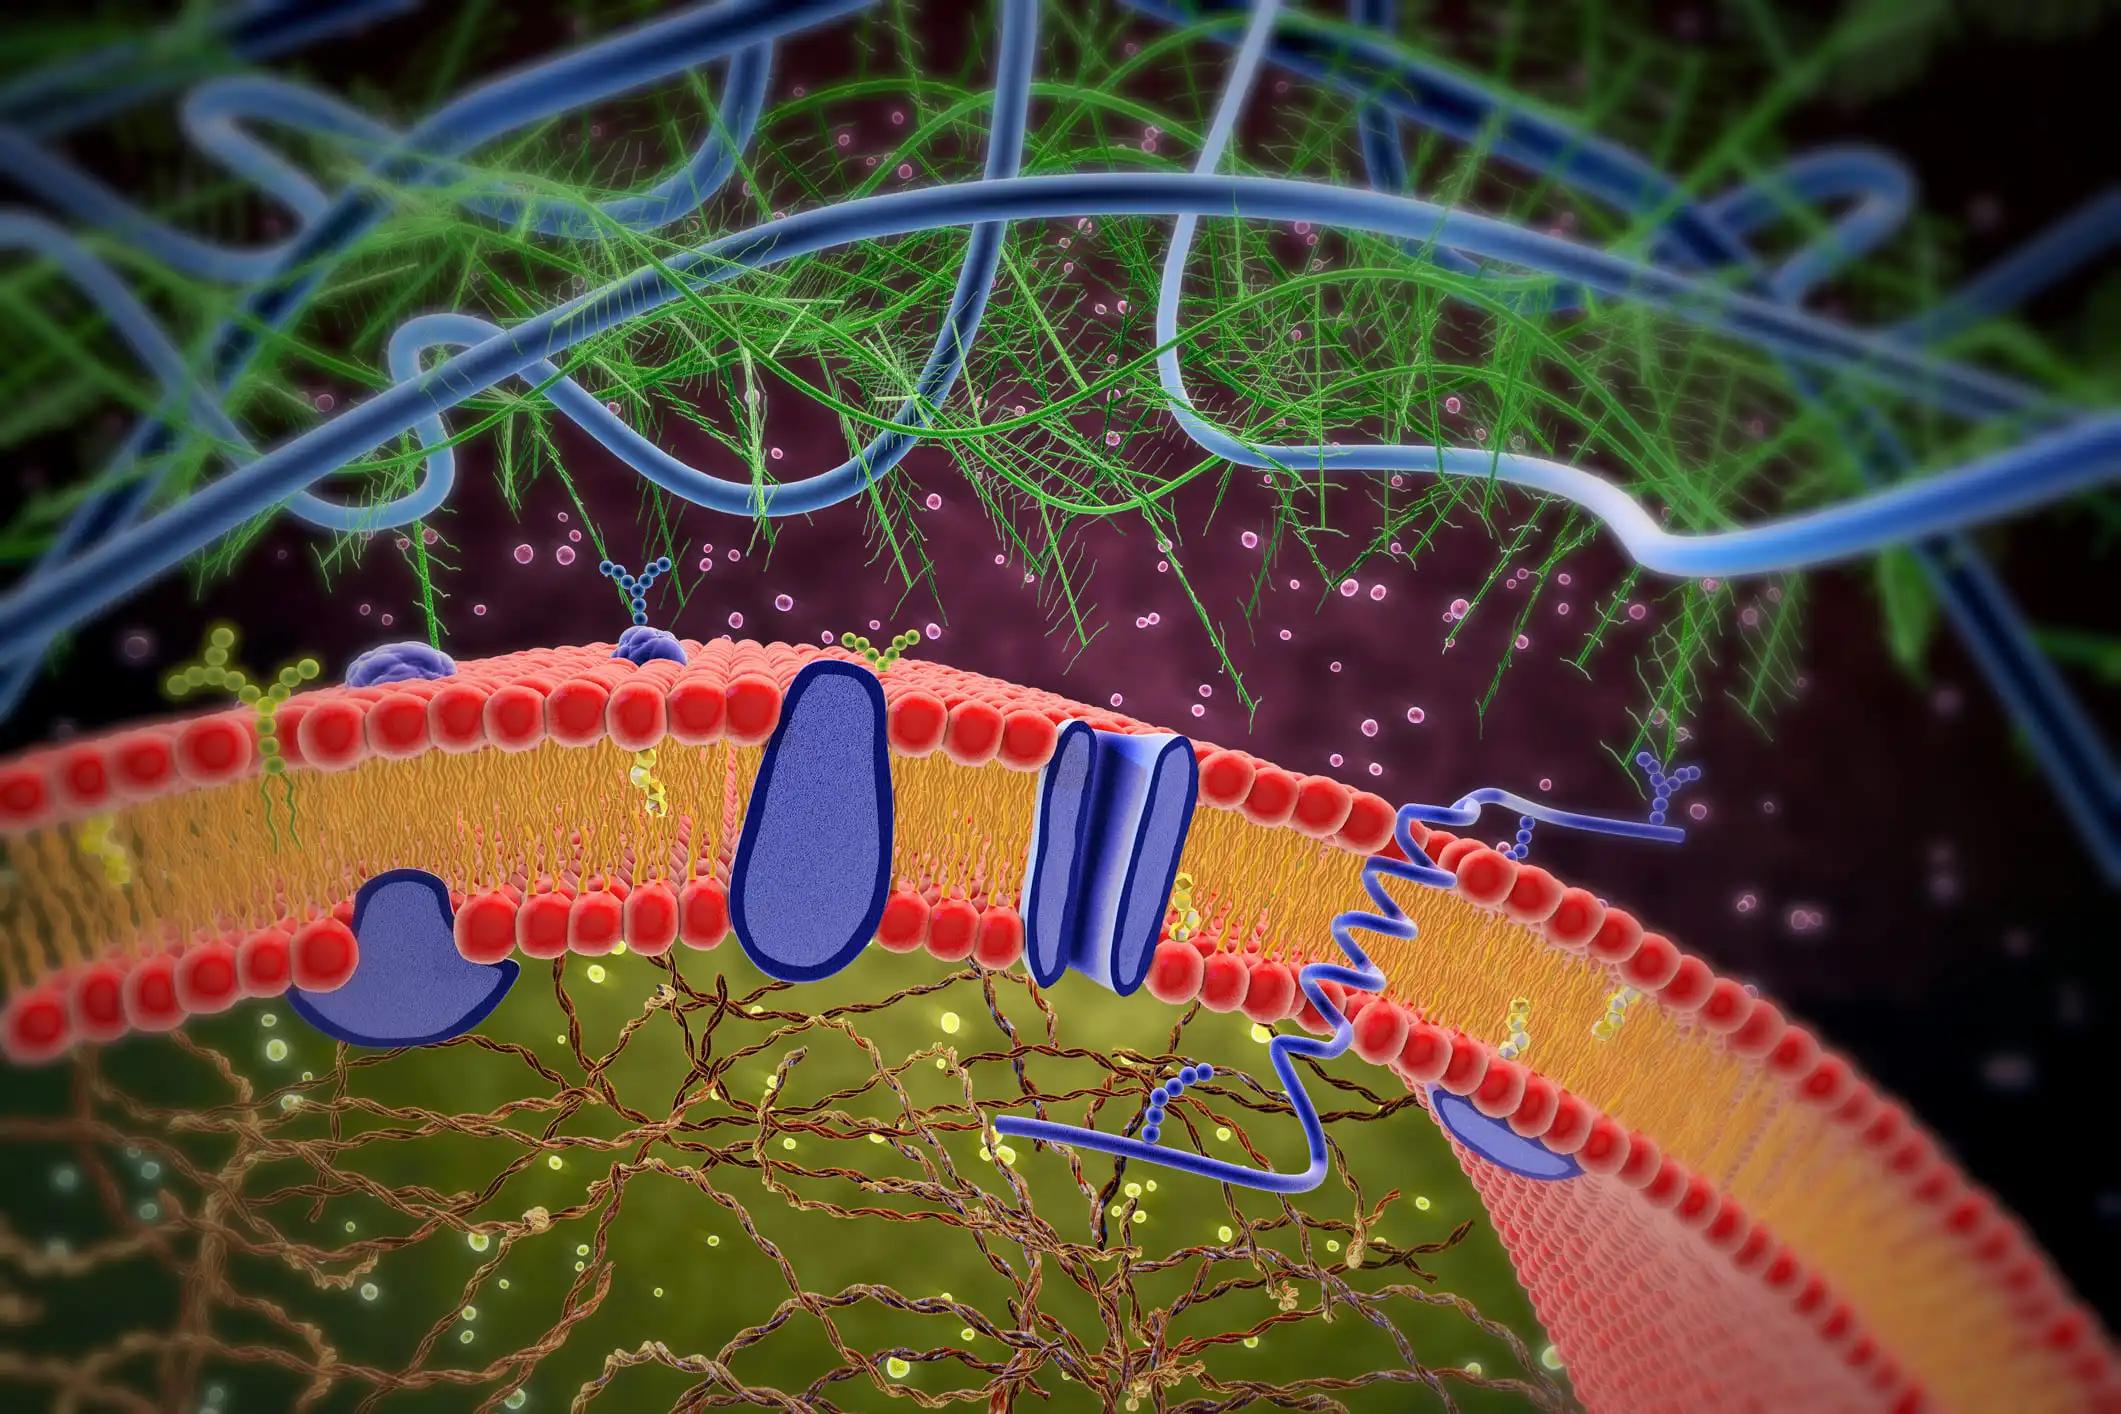 Lipid Bilayer Structure in the Cell Membrane